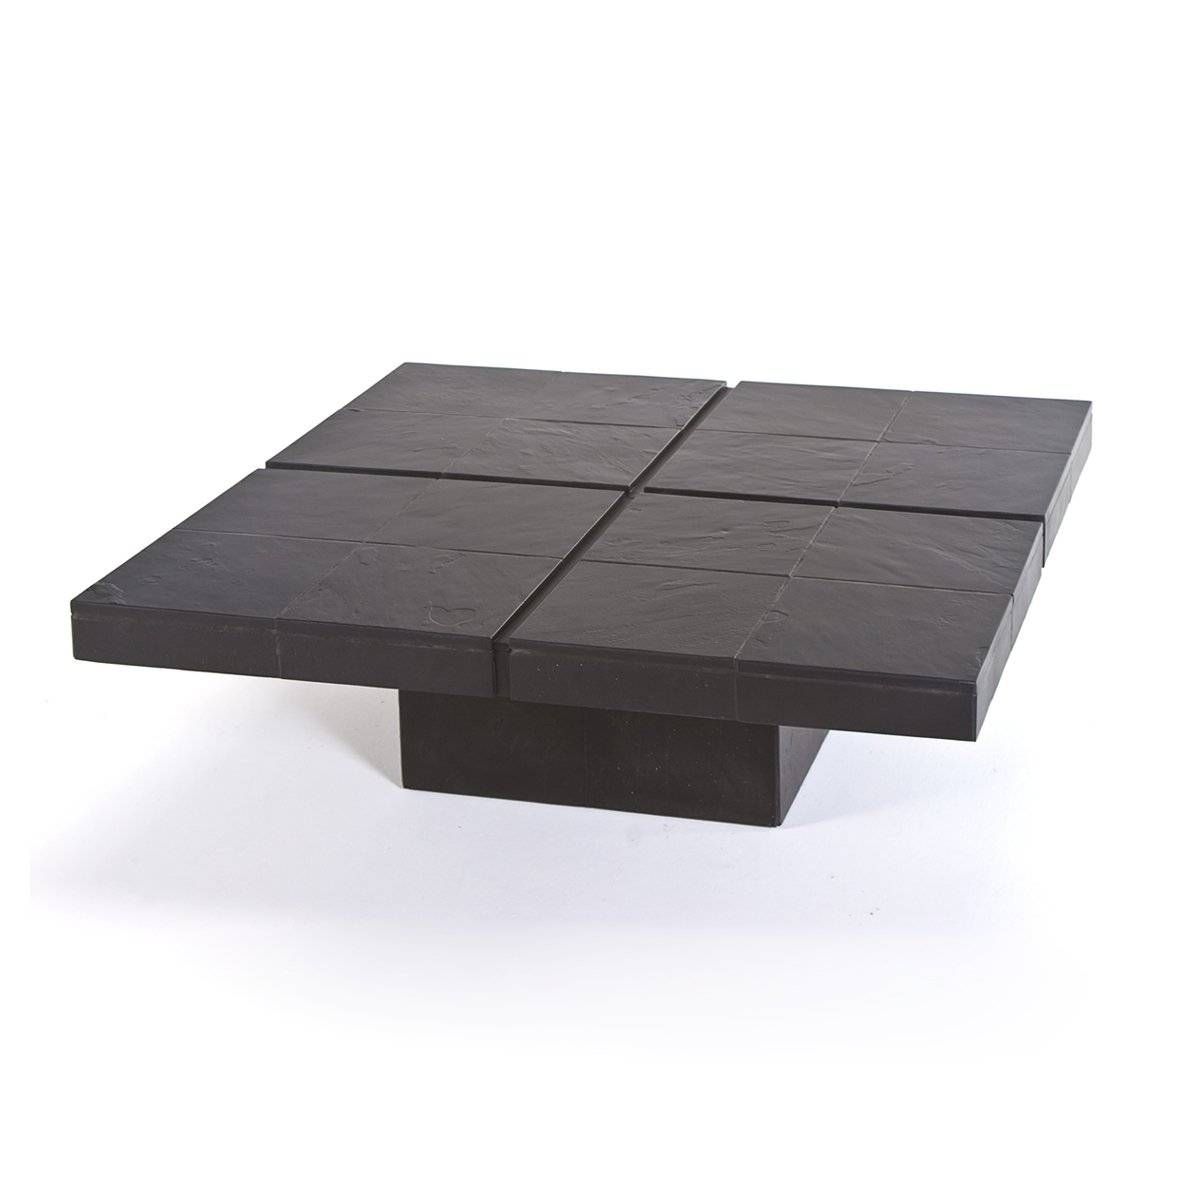 Surfmark : Small Space Coffee Table And Dining Table Options Inside Low Japanese Style Coffee Tables (View 5 of 30)